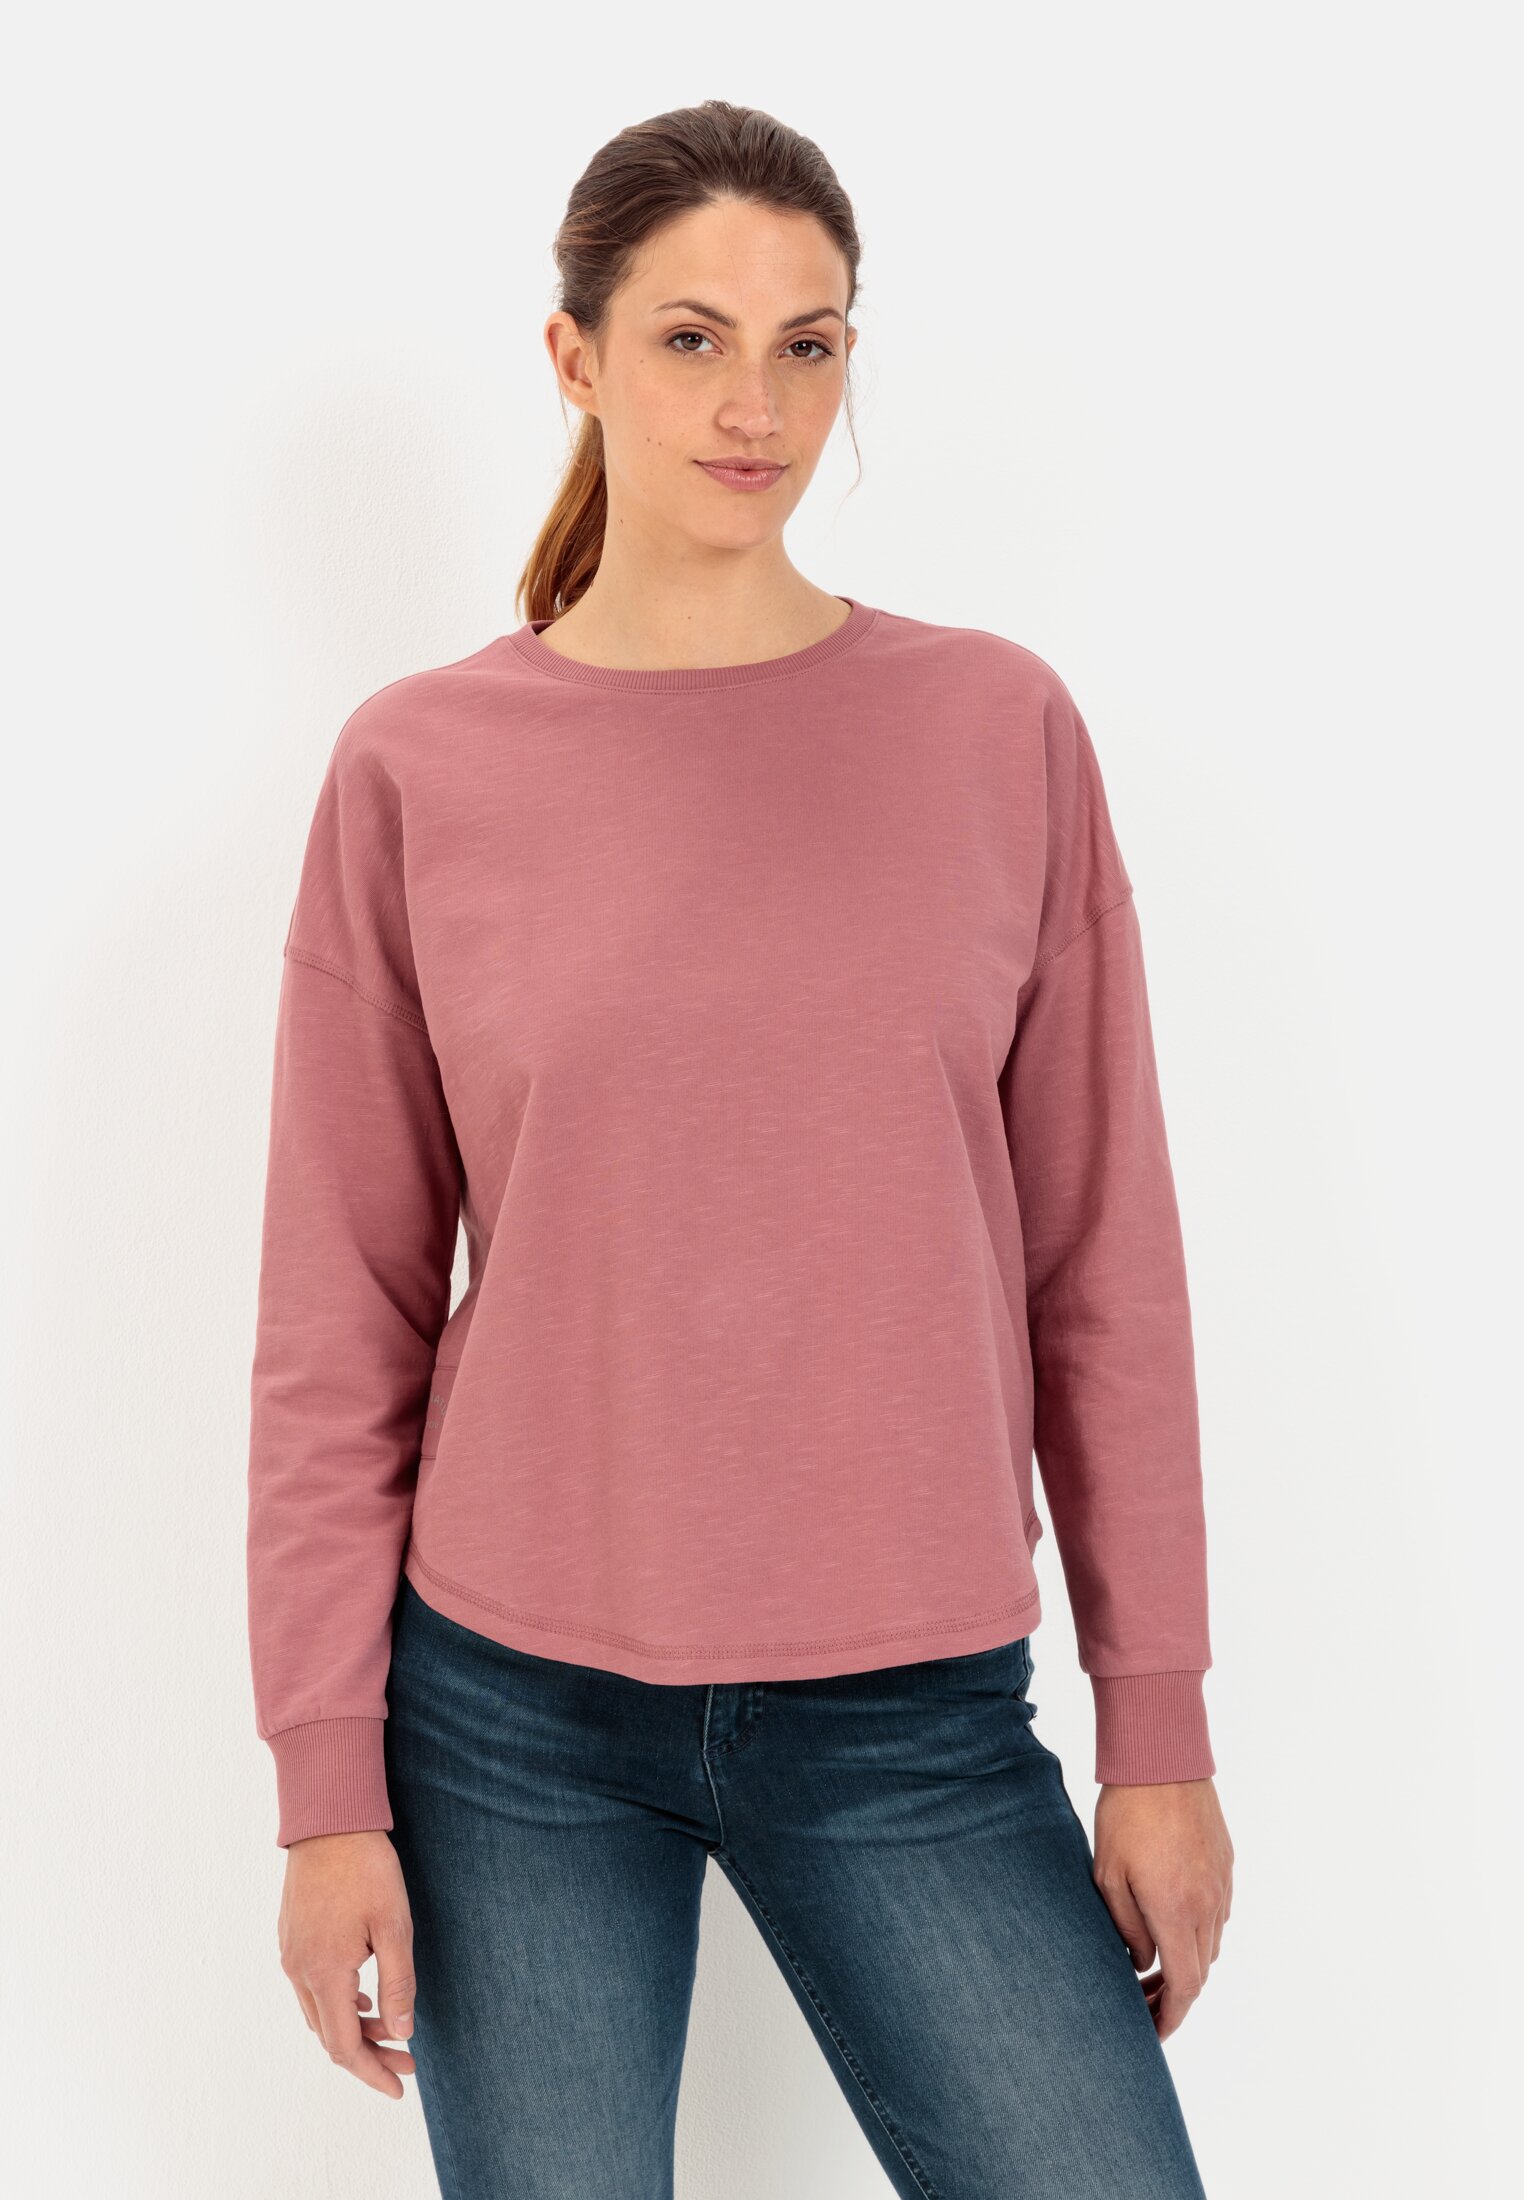 Camel Active Round neck sweatshirt made from pure cotton